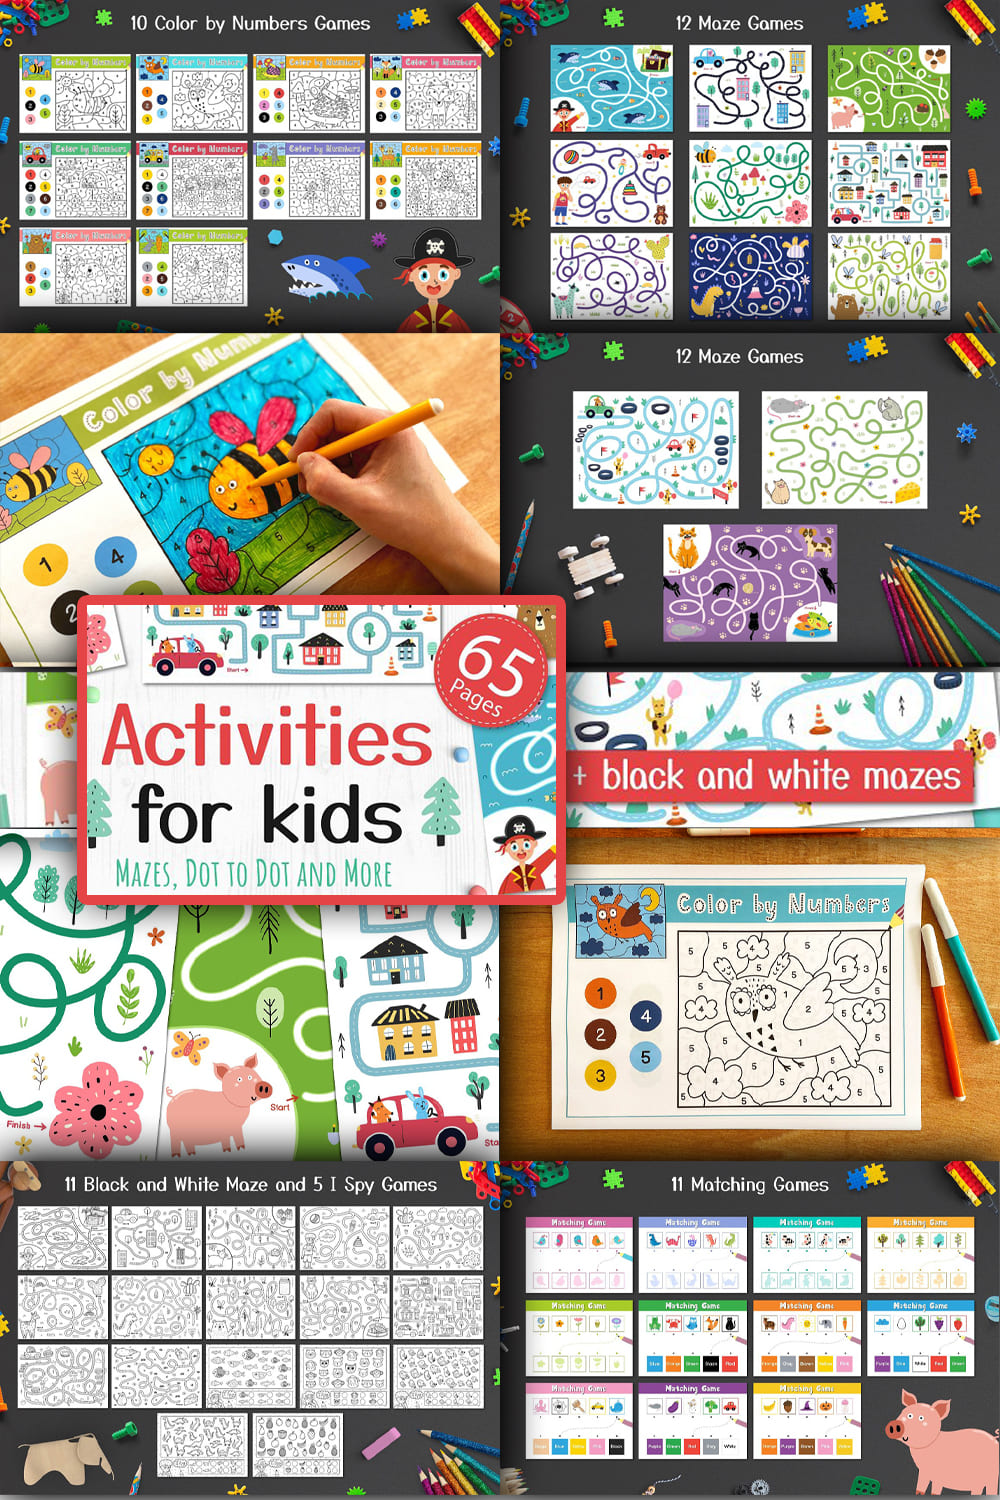 Color and black and white pictures with children's games.